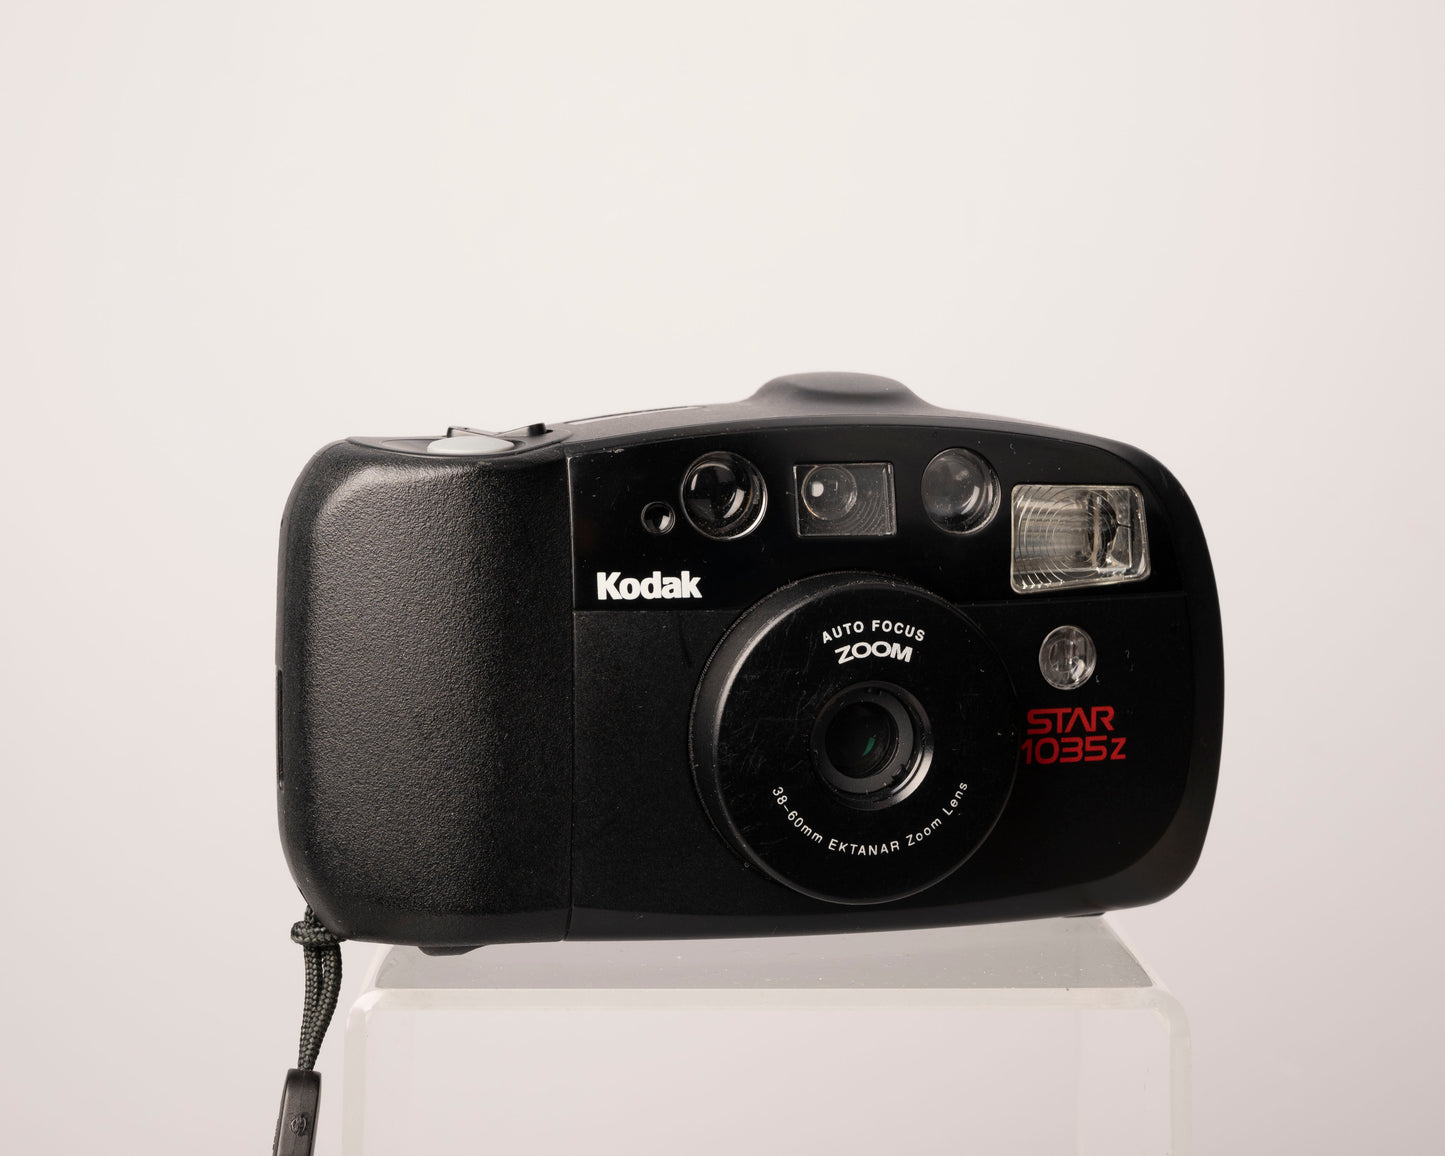 The Kodak Star 1035z is an autofocus 35mm film point-and-shoot from 1993 featuring a 38-60mm lens